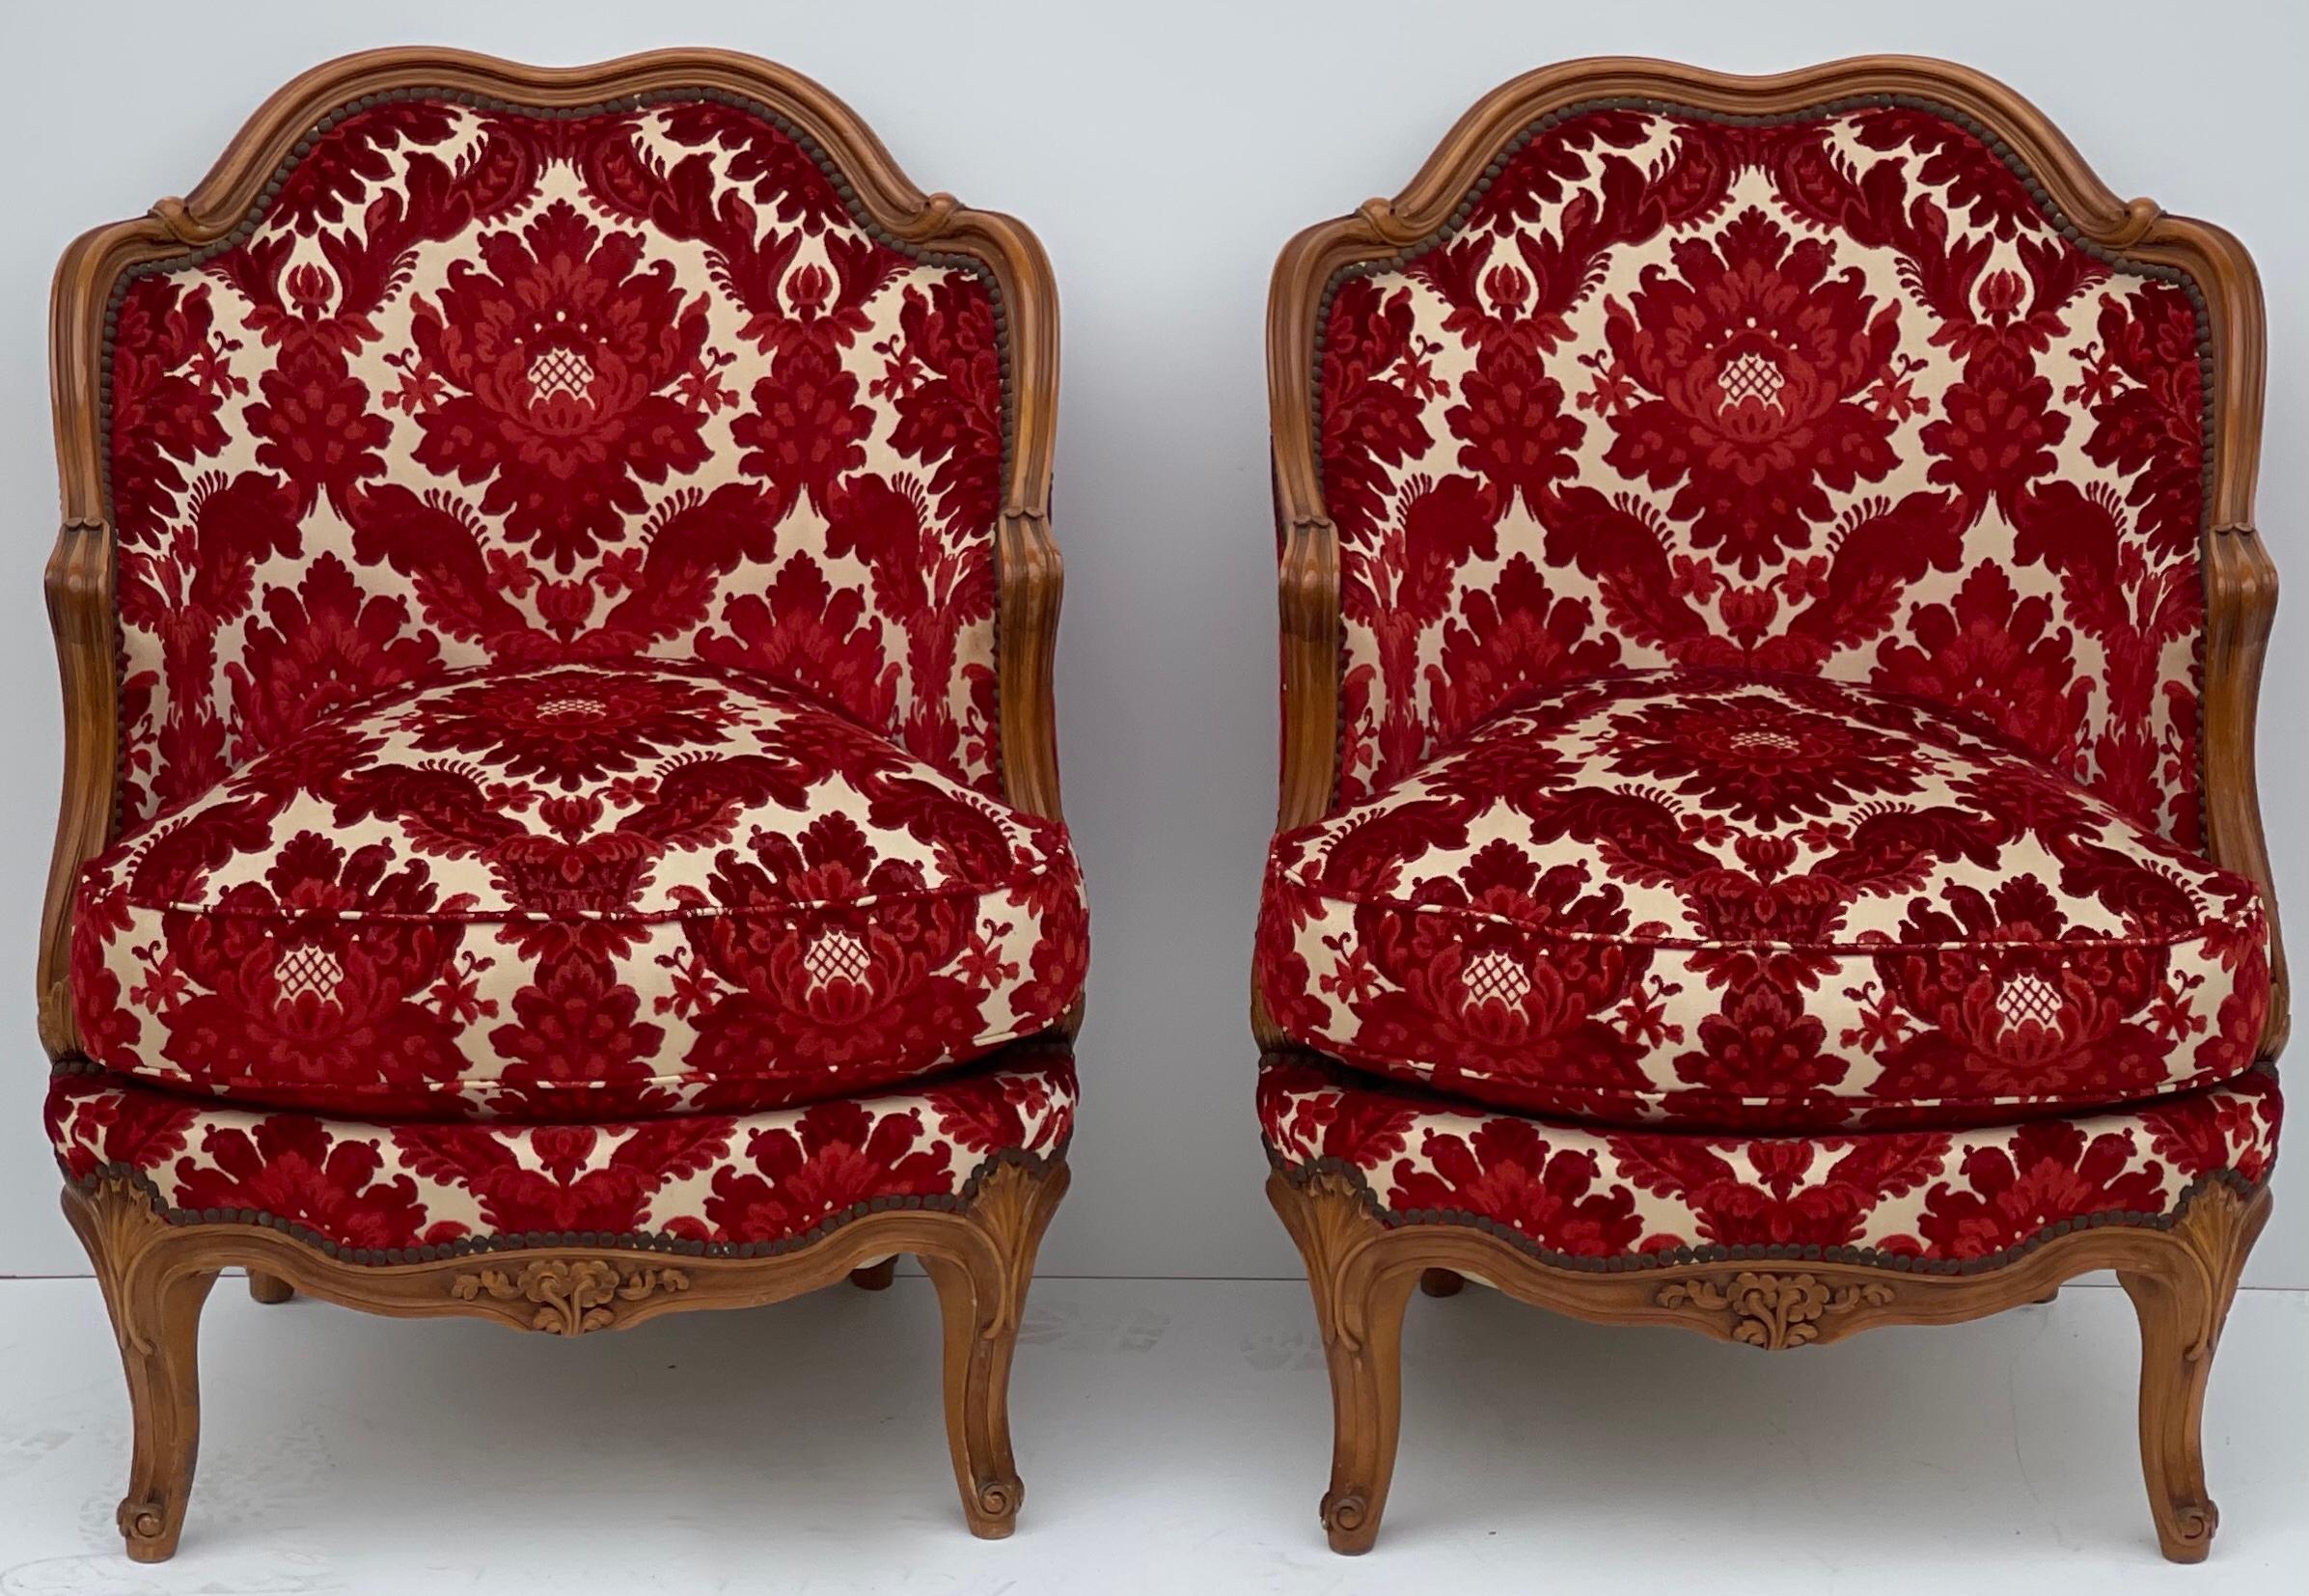 1930s French Carved Fruitwood Chairs in Red Cut Velvet Damask, Pair 5